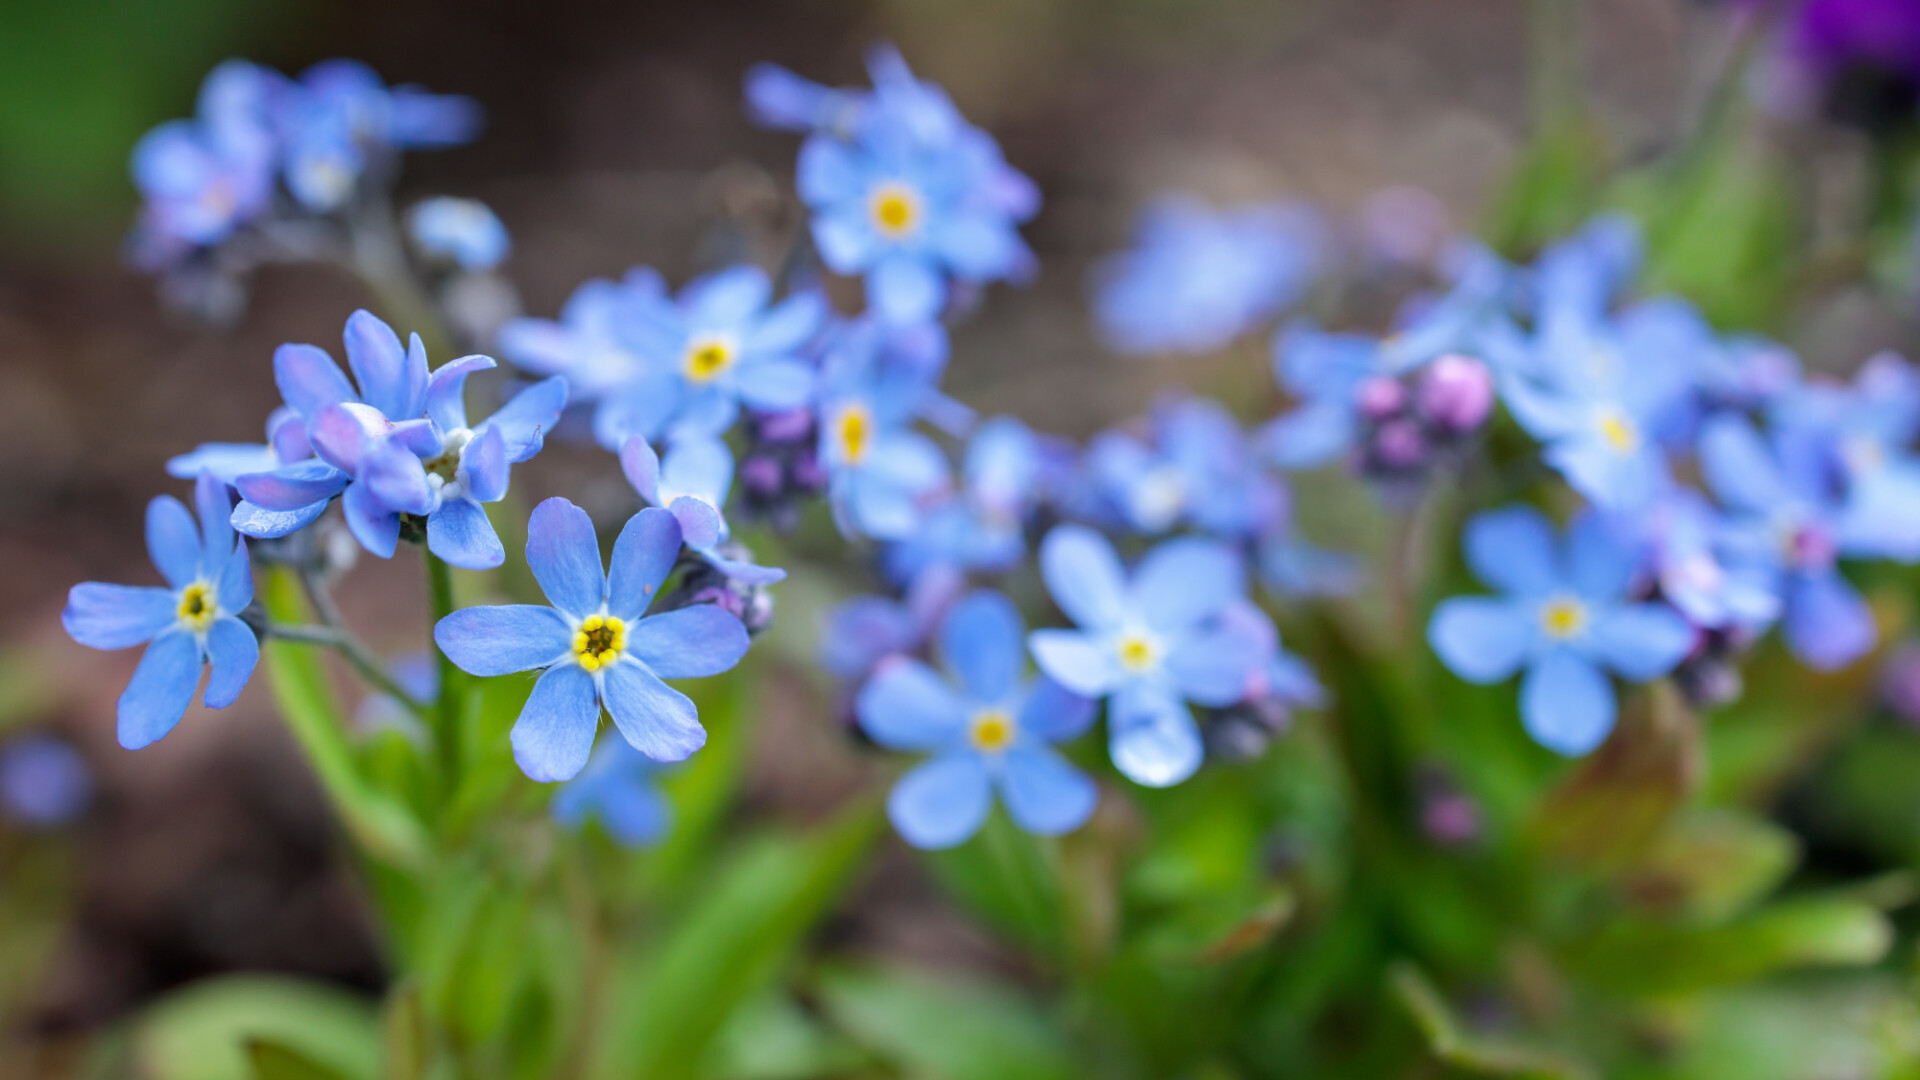 Forget-me-nots spring flowers